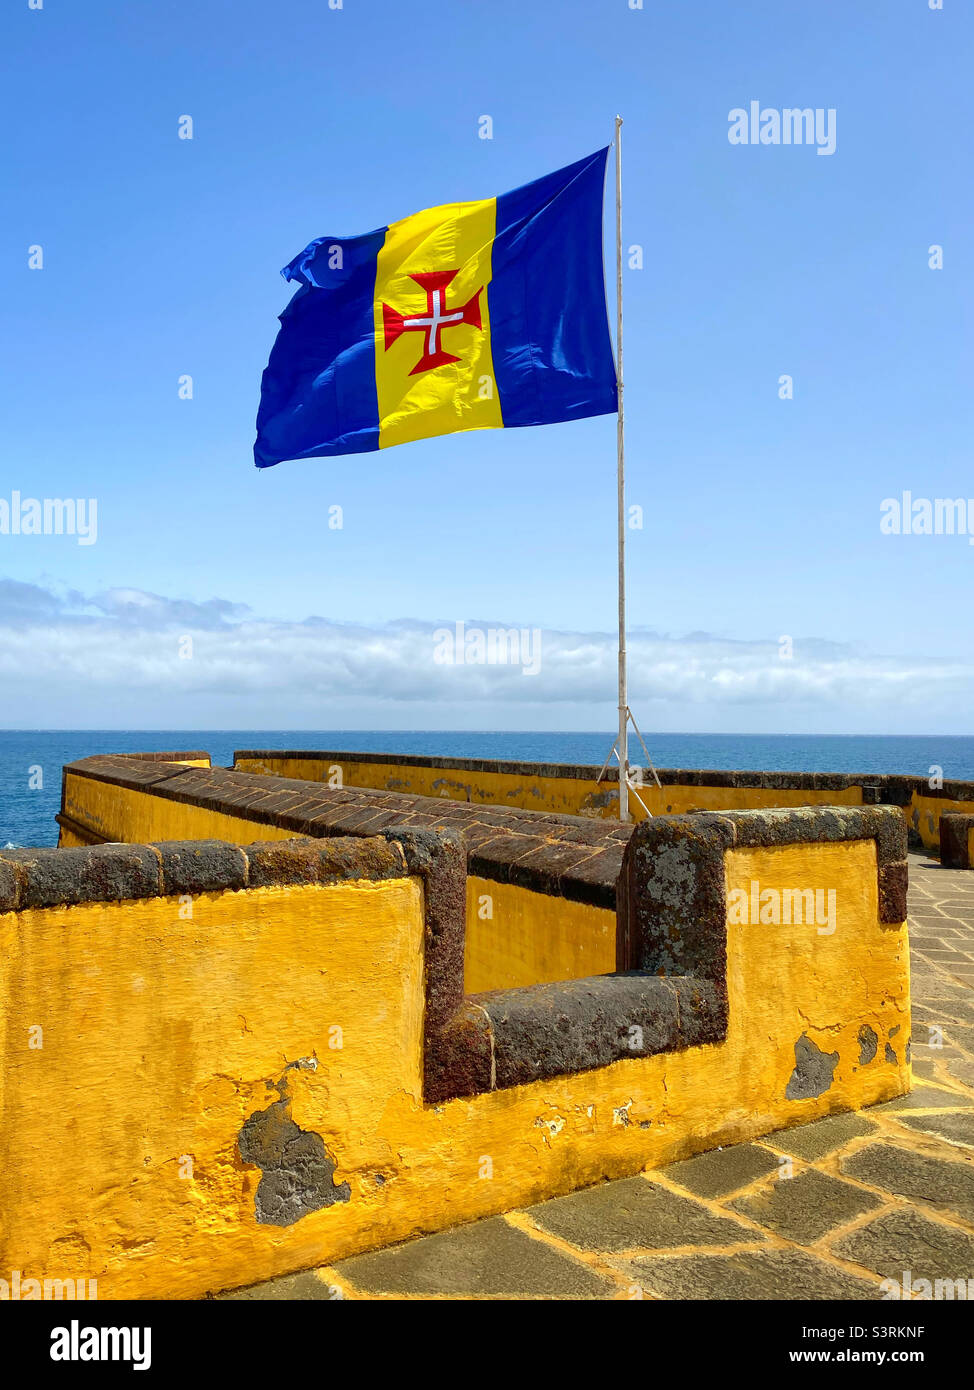 The flag of Madeira flies proudly @ Forte de Sâo Tiago in Funchal, Madeira. The flag was adopted 28th July 1978. This famous fort was constructed in the 17th Century and is a famous Funchal landmark. Stock Photo